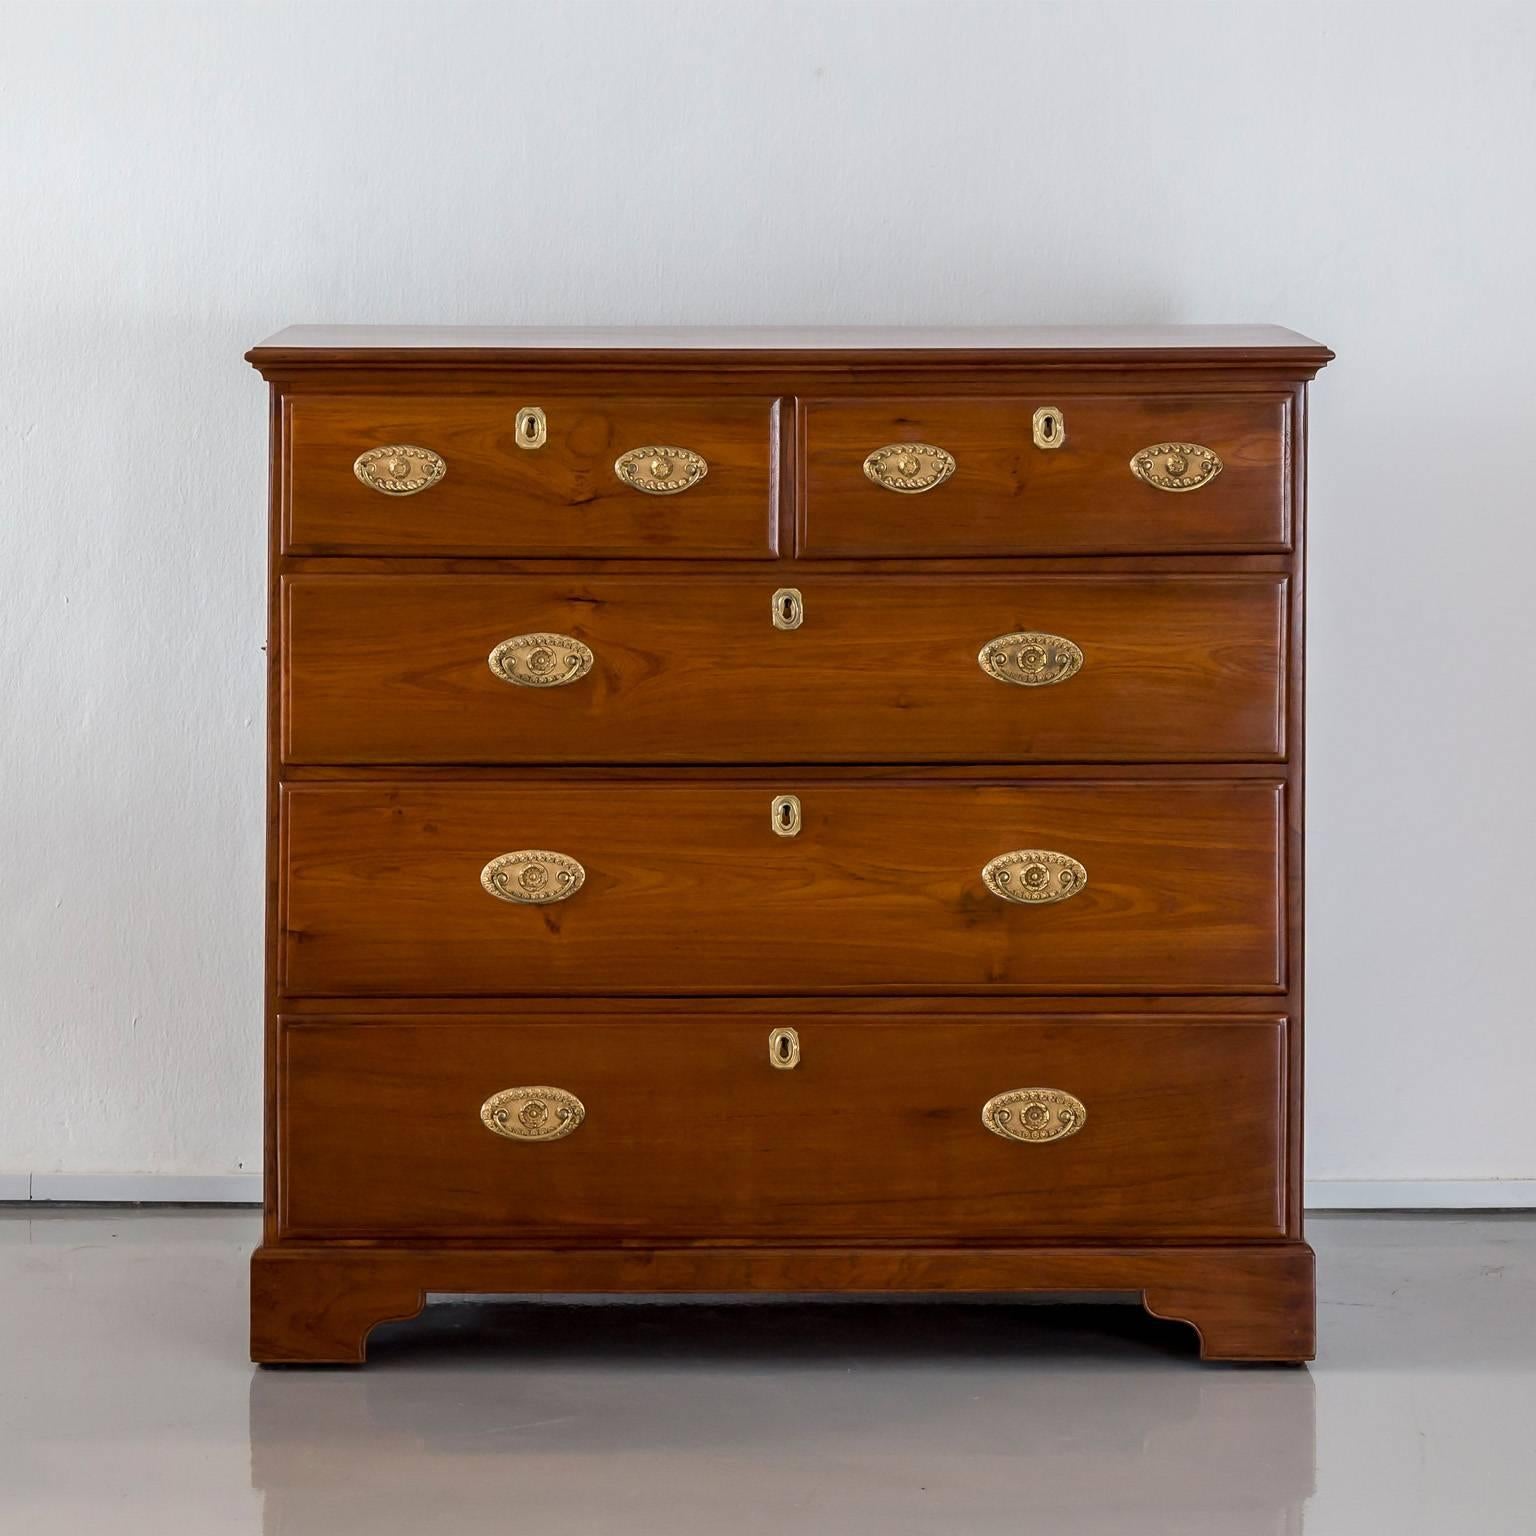 A British colonial Regency teakwood chest of drawers with a beautifully figured rectangular moulded top. Two short drawers above three long drawers of equal size, all with the original ring plate handles and escutcheons. The drawers with dovetail